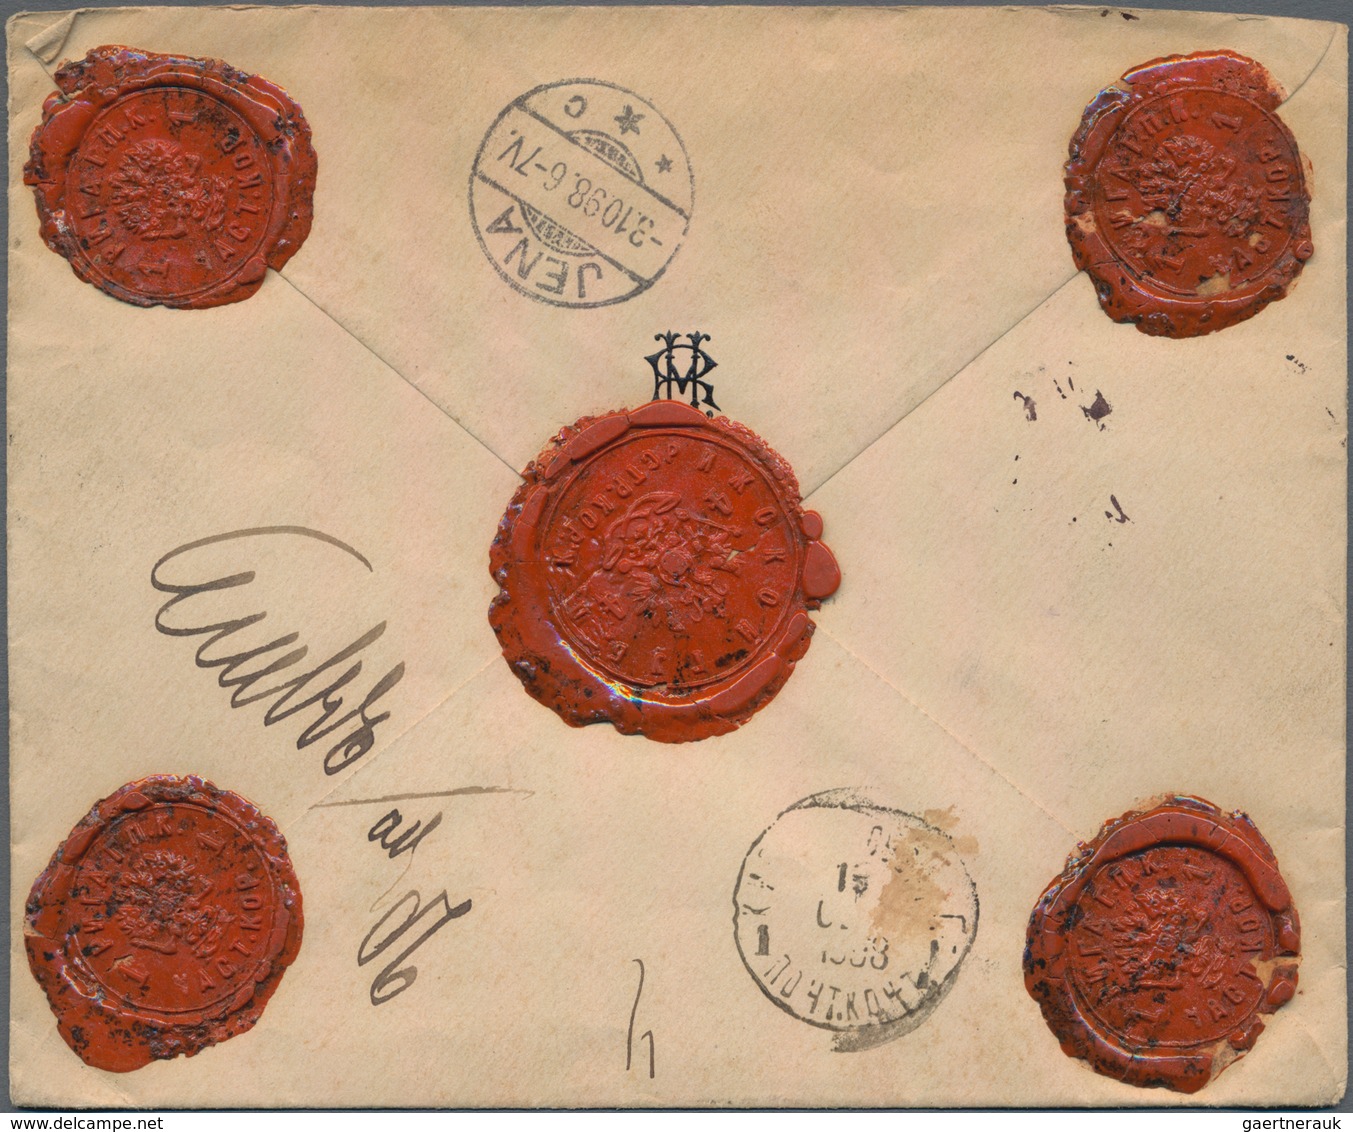 Russland: 1898, Value Letter Over 4 Rubles With Well Preserved Wax Seals From Riga To Jena. - Used Stamps